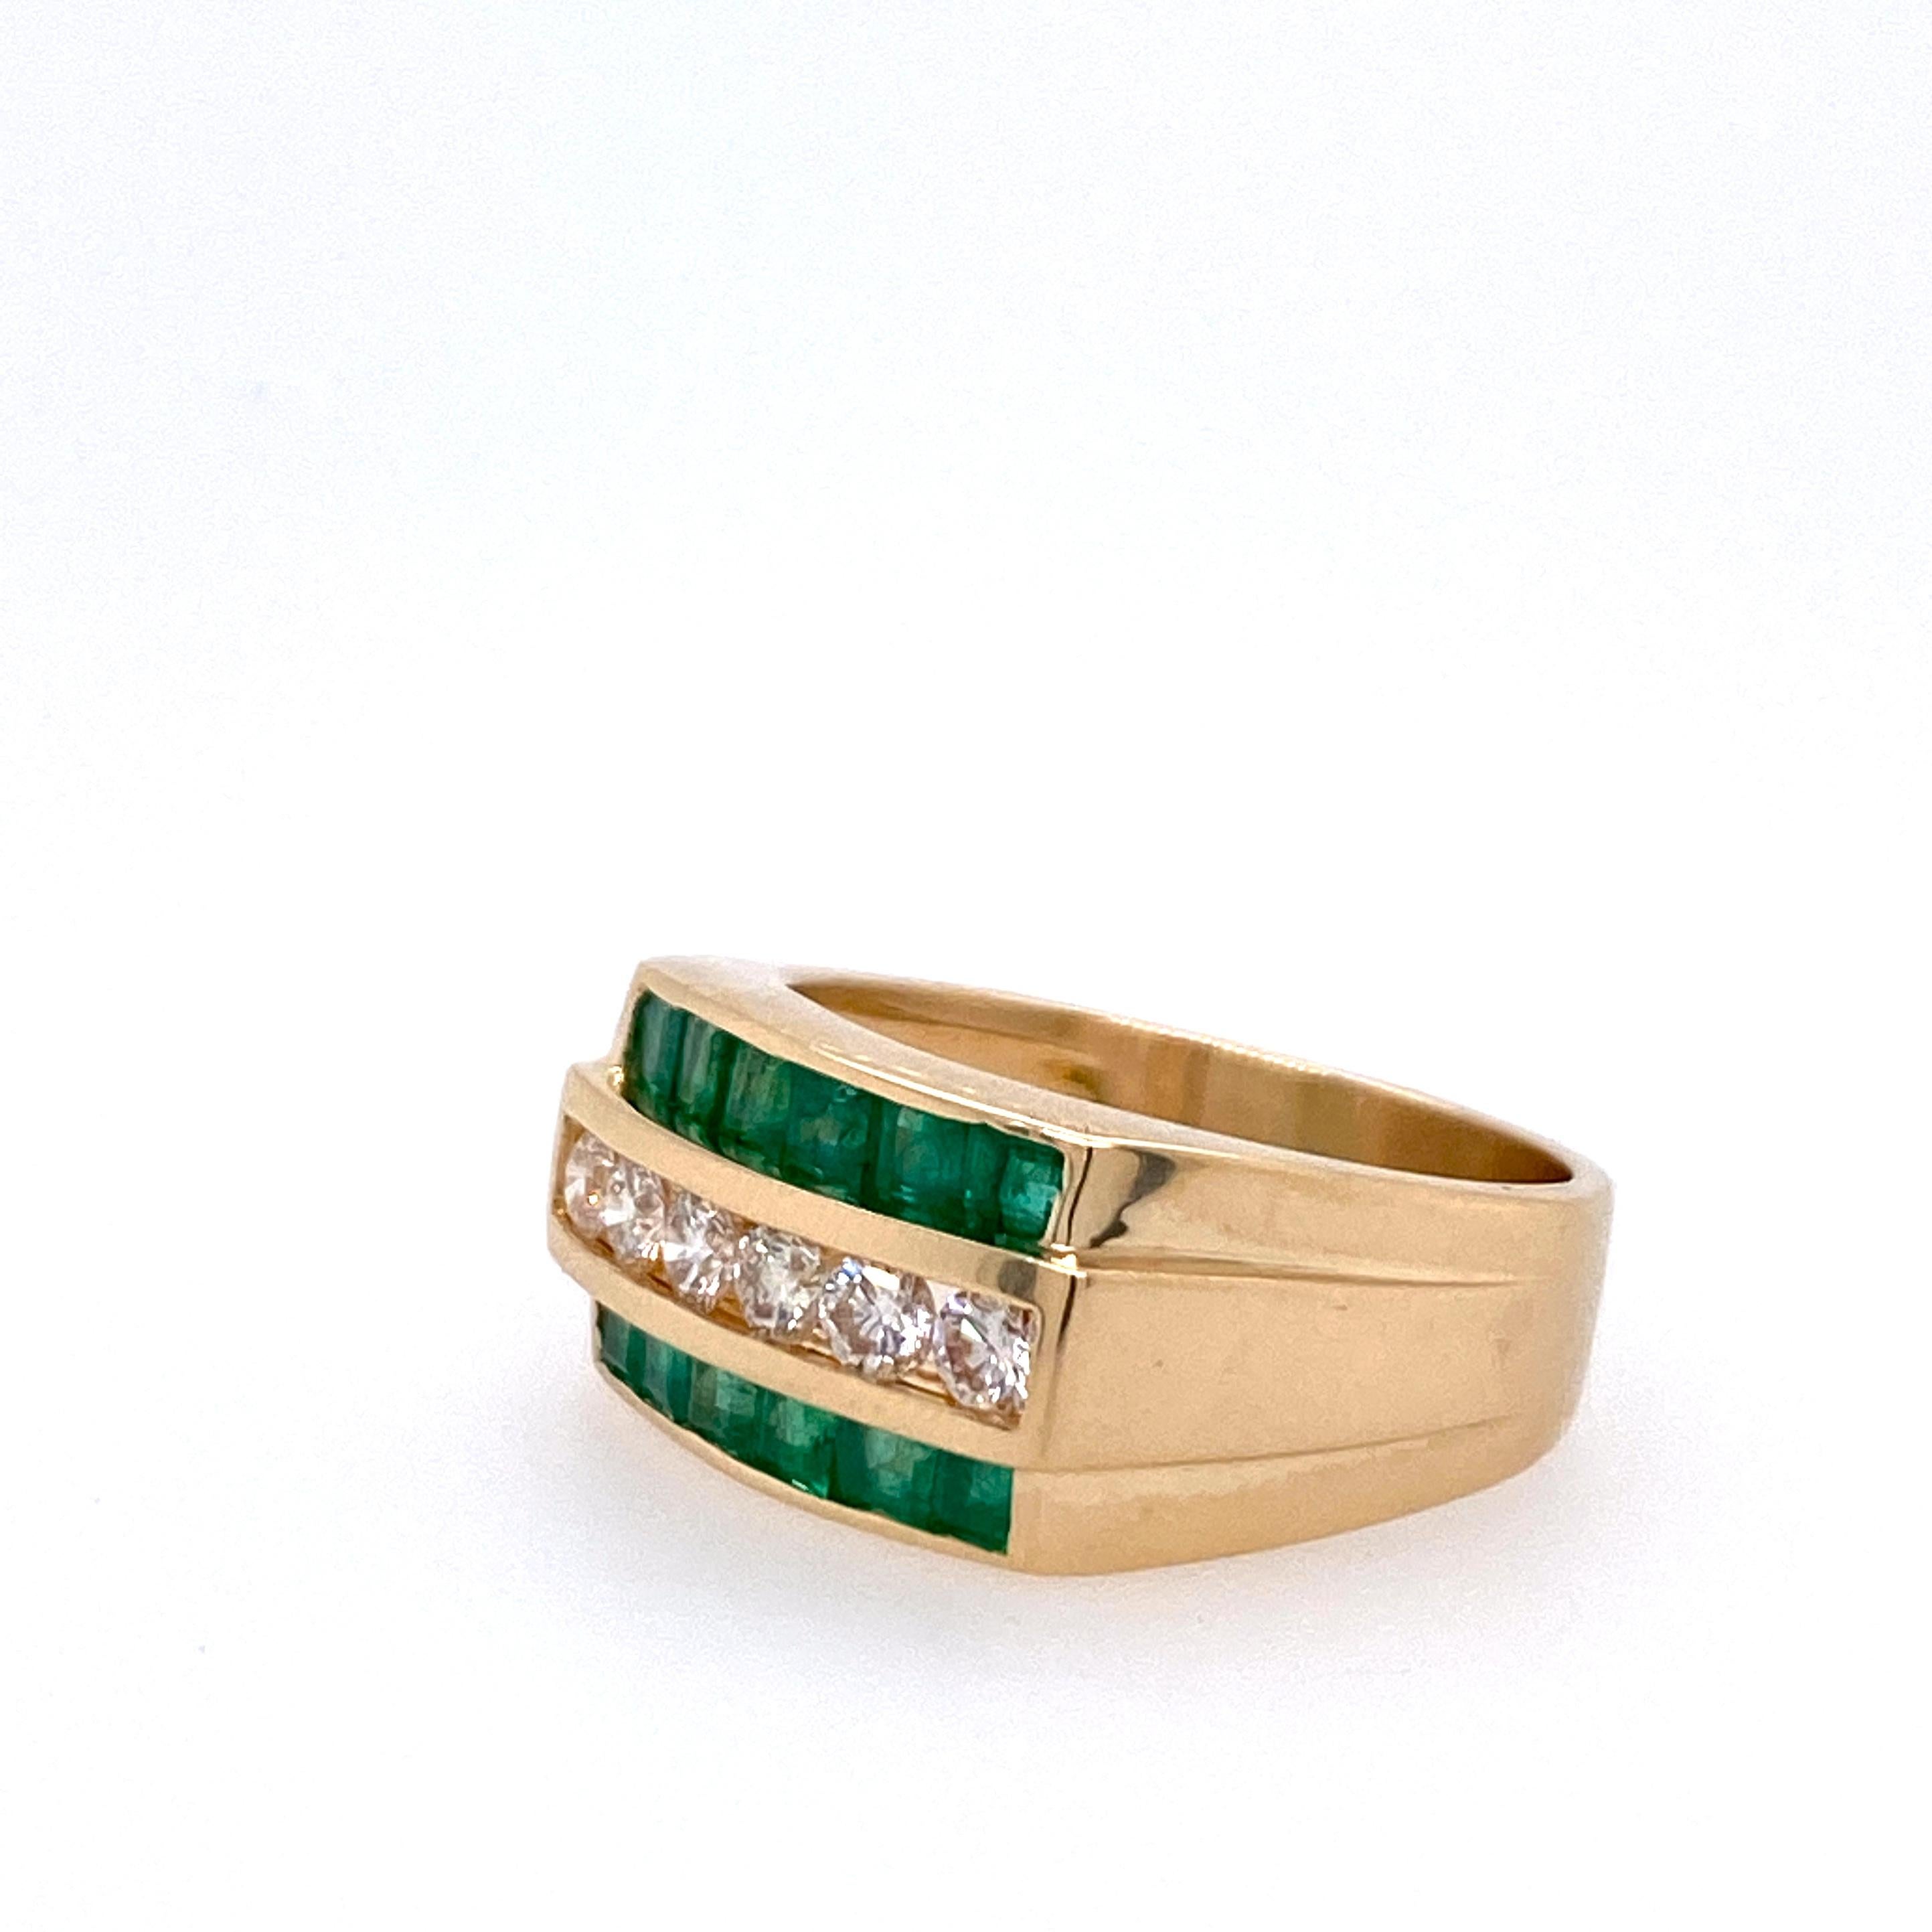 One 14 karat yellow gold men's ring channel set with twelve square step cut emeralds, approximately 1.25 carat total weight with a single row of six channel set round brilliant diamonds, approximately 0.25 carat total weight with matching H/I color